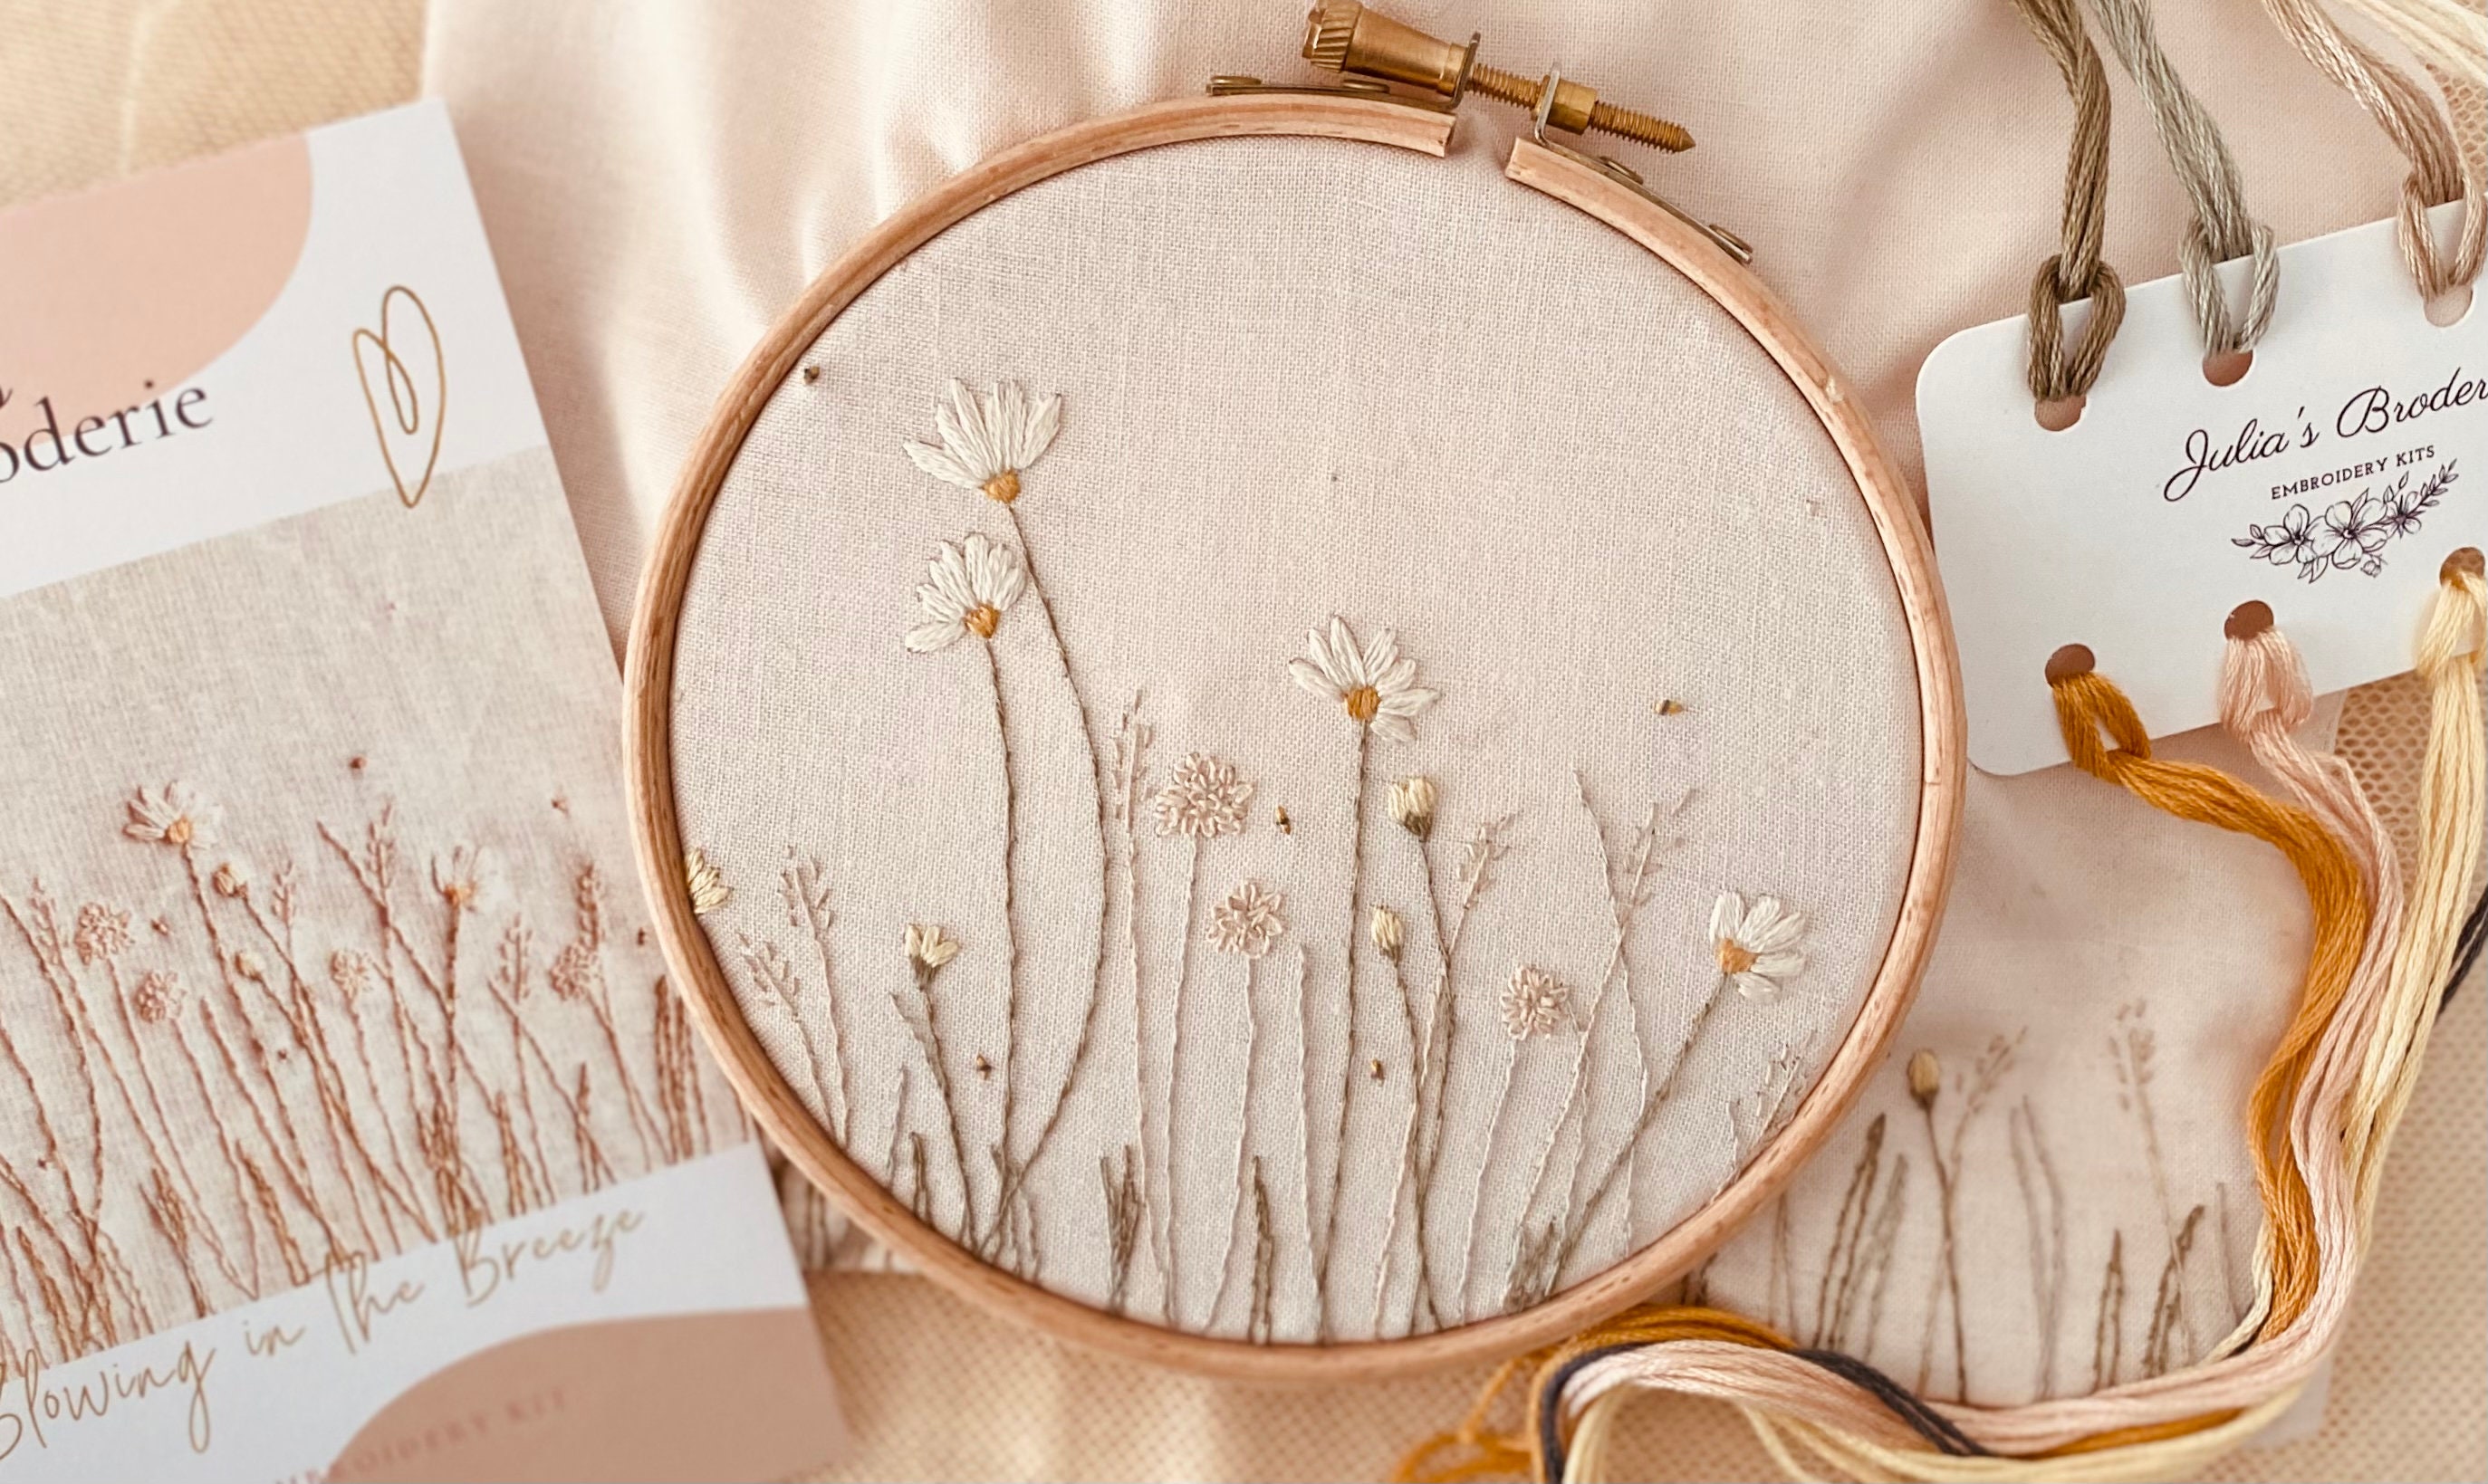 Charming DIY Embroidery Kits for Beginners Make Crafting a Breeze